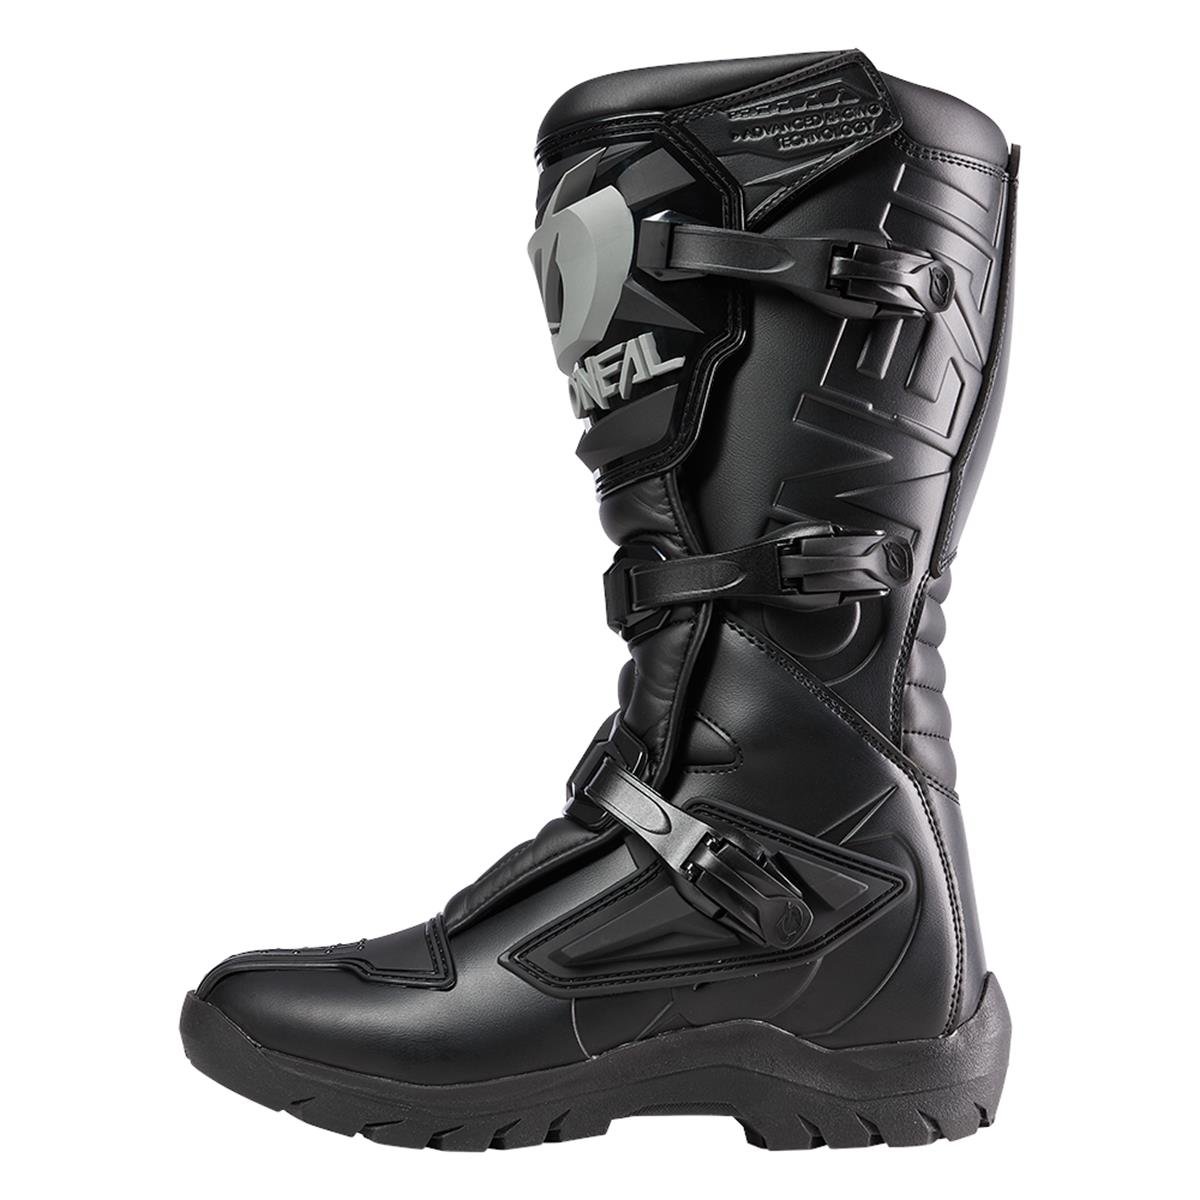 O'Neal MX Boots RSX Adventure Black, 54% OFF